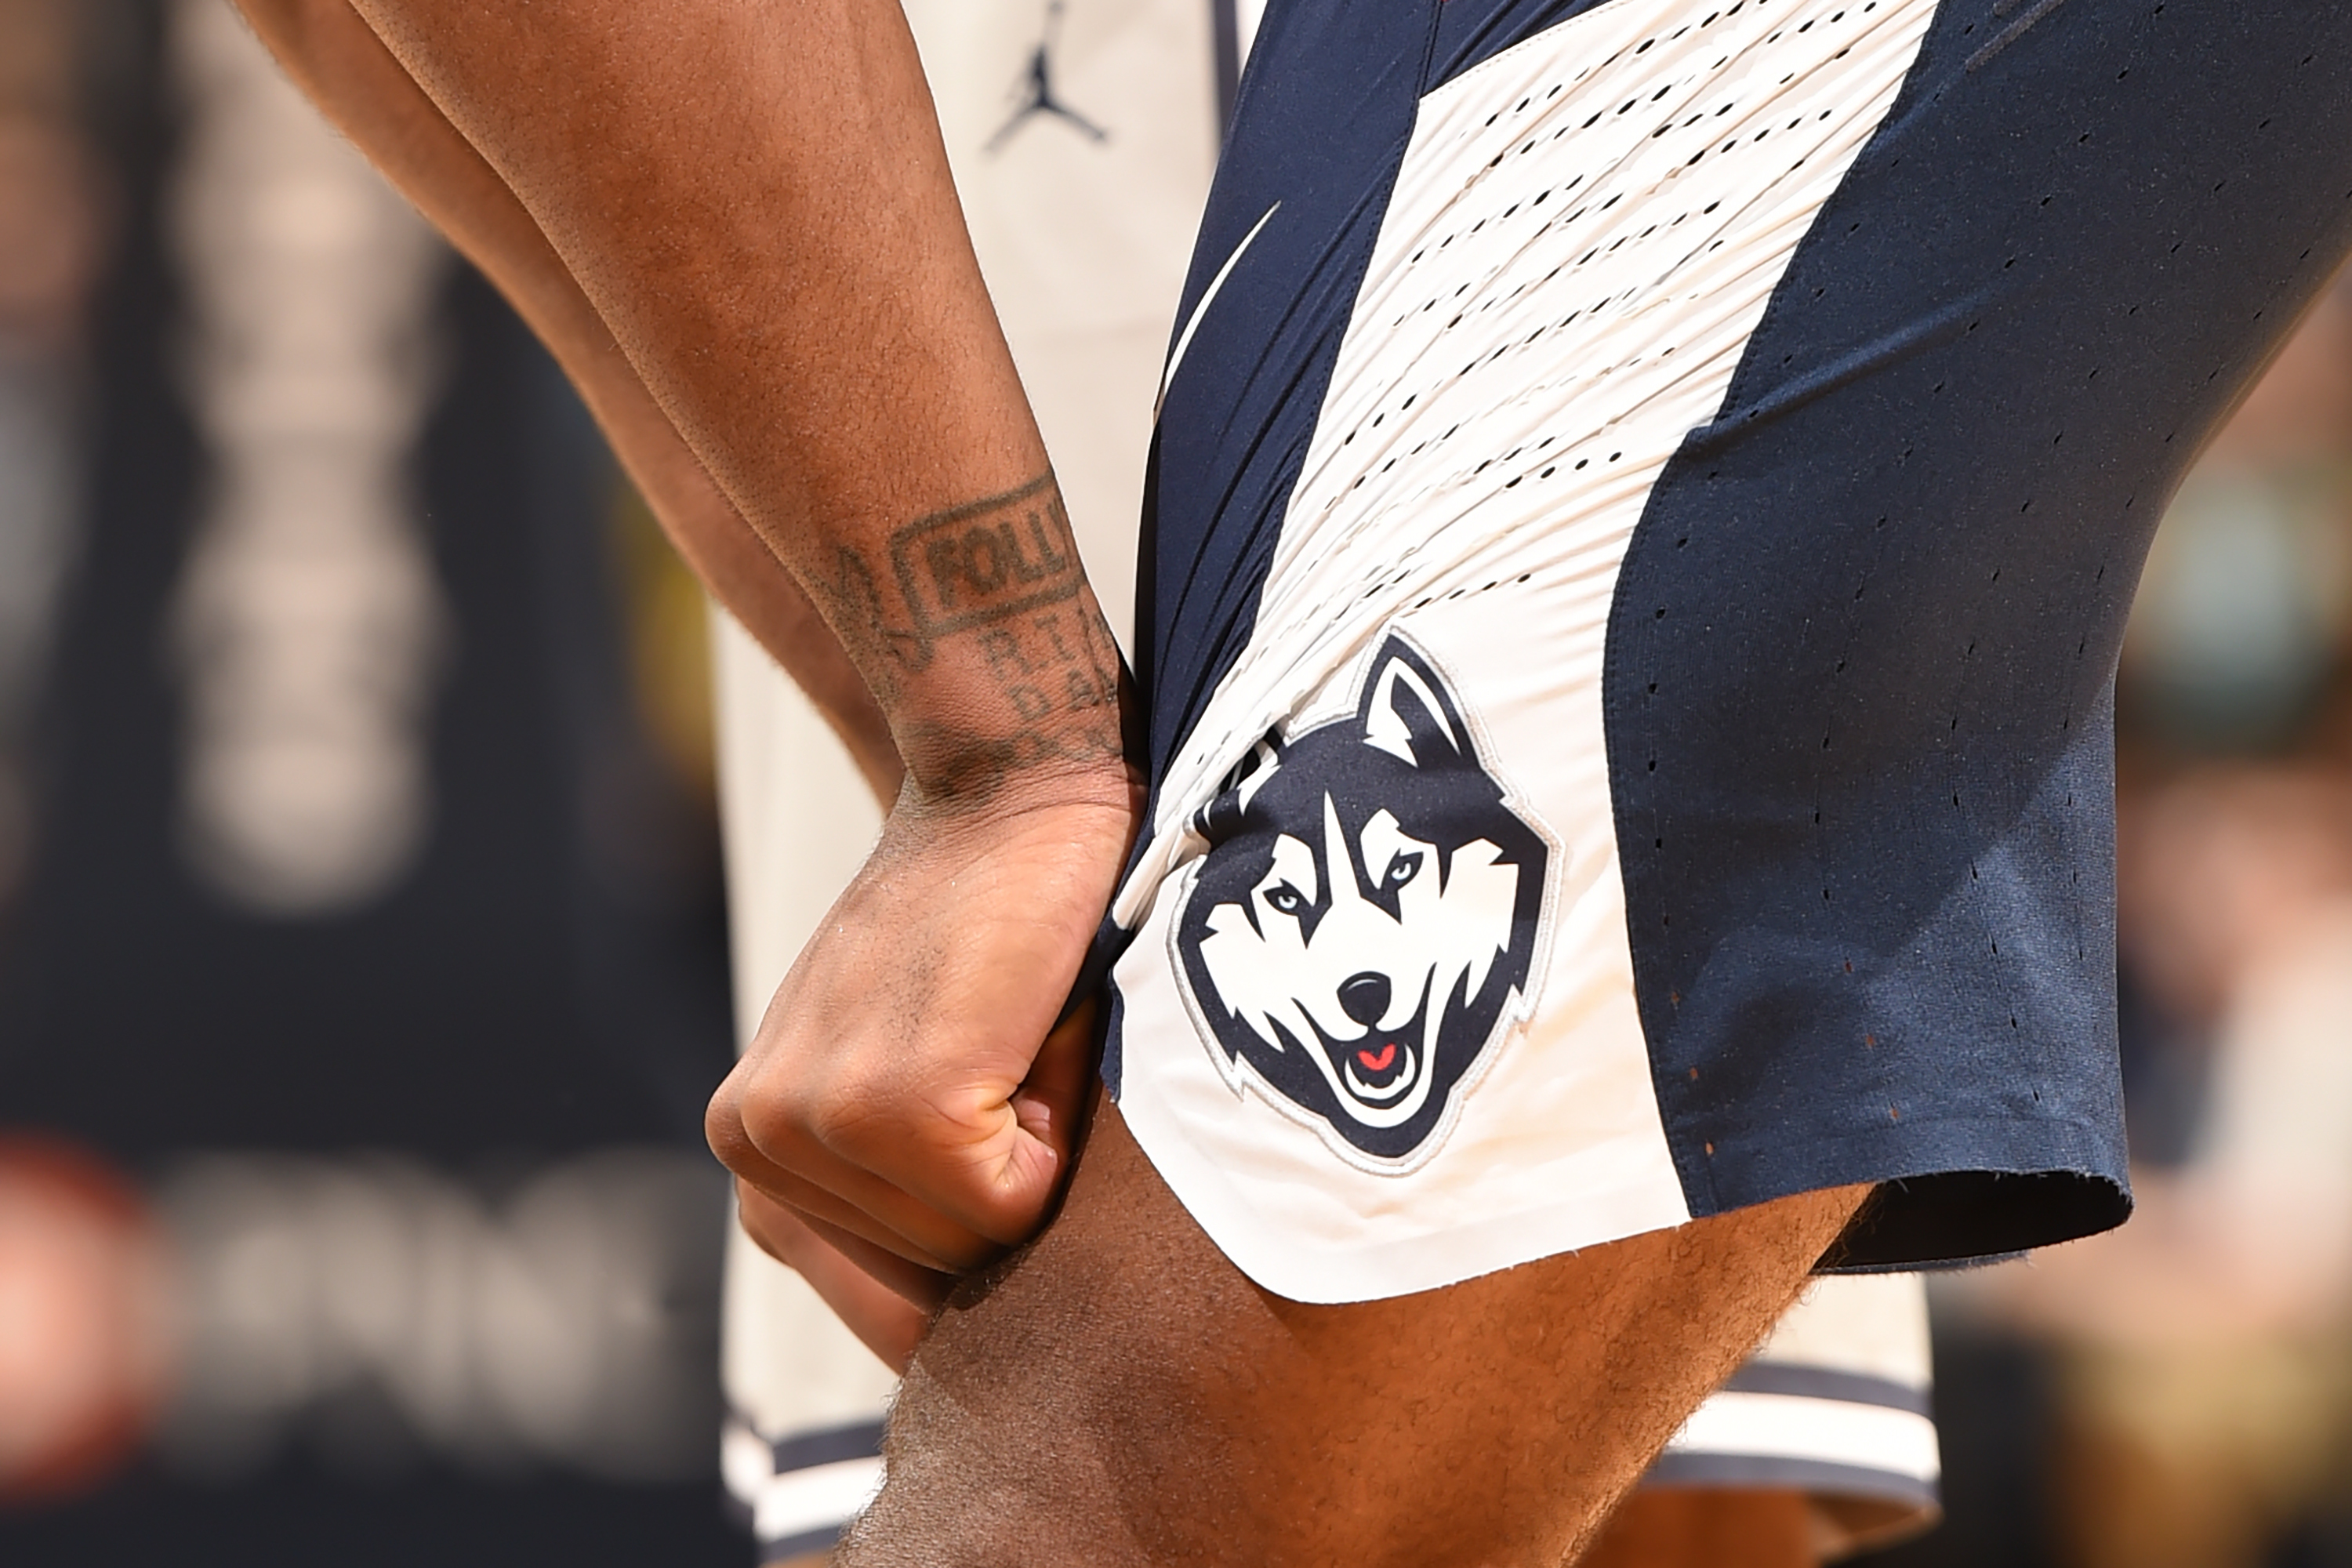 Uconn Receives Ncaa Inquiry Into Men S Basketball Team For Potential Violation Bleacher Report Latest News Videos And Highlights